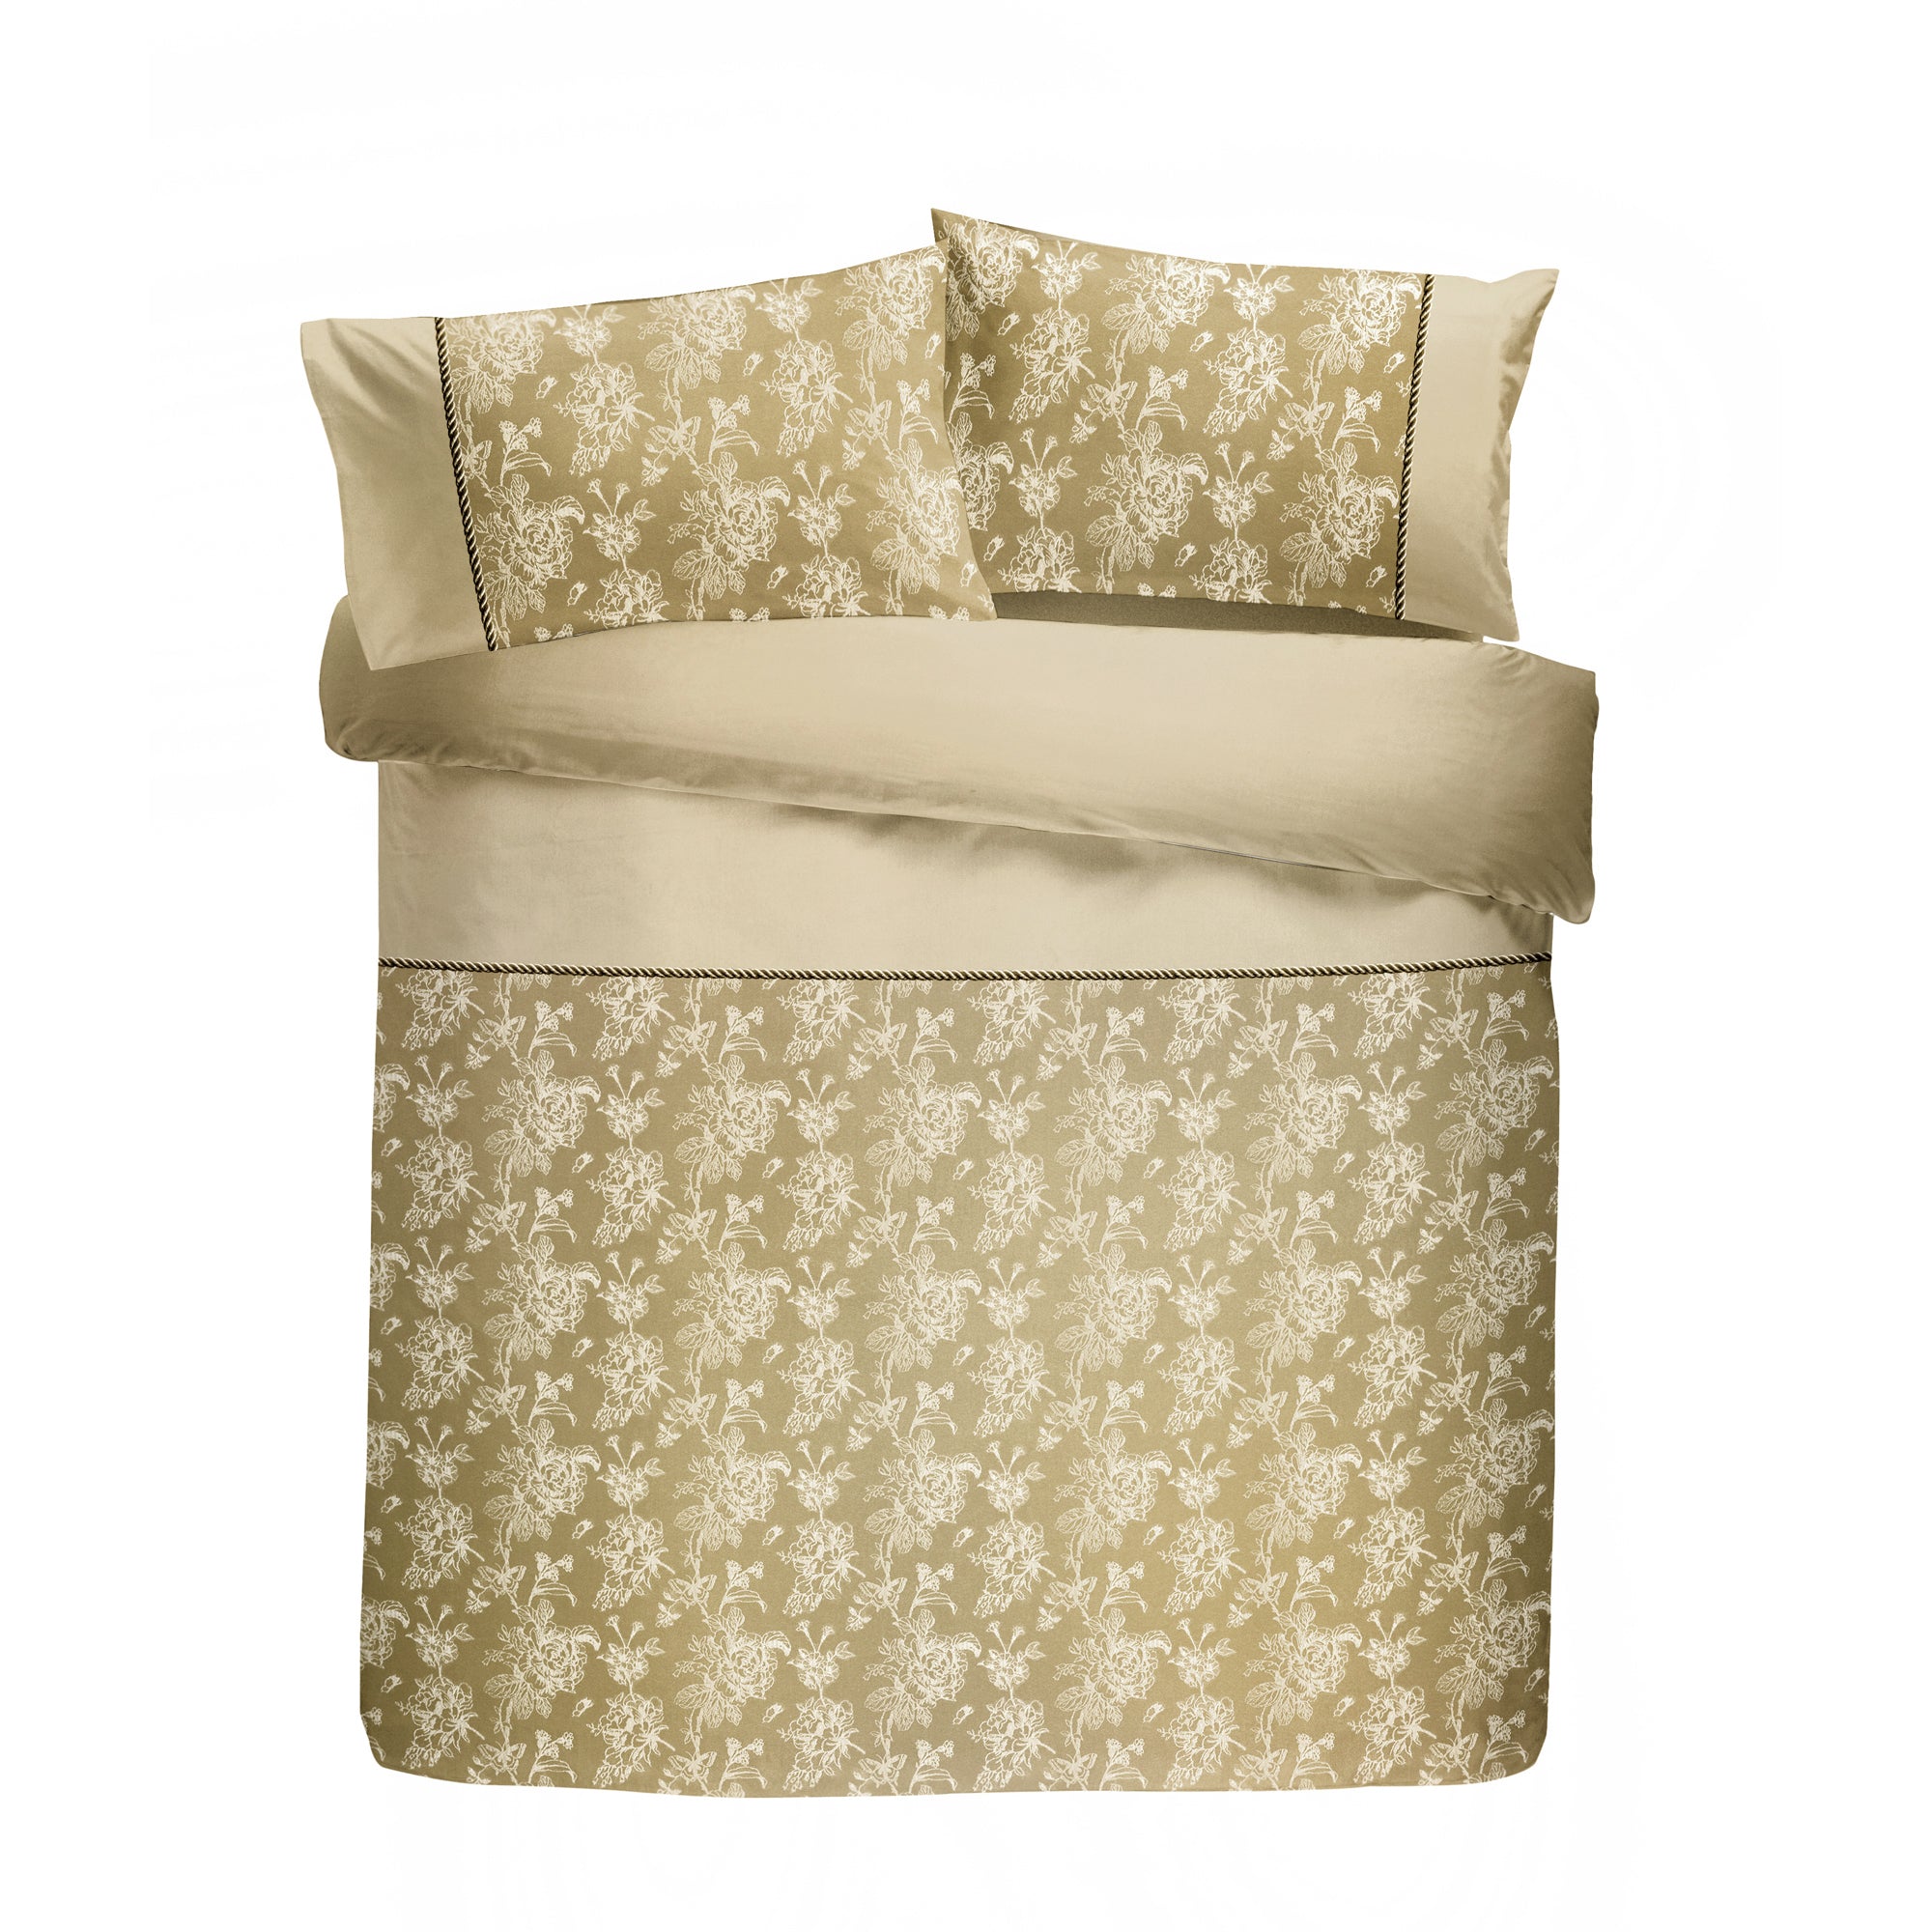 Jasmine - Damask Easy Care Bedding Set, Curtains & Cushions in Champagne - by D&D Woven